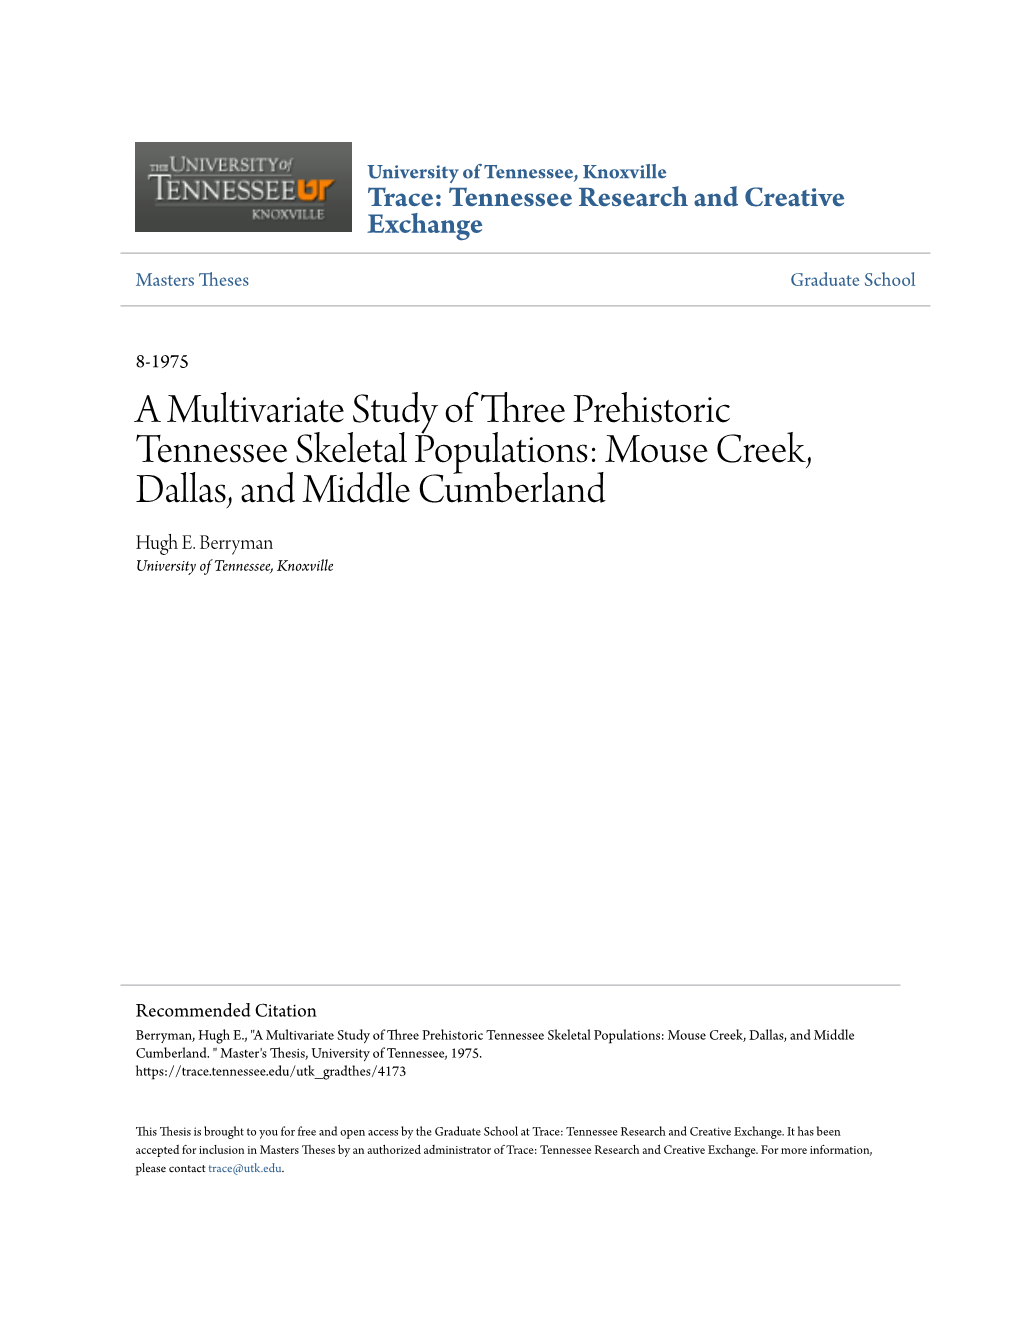 A Multivariate Study of Three Prehistoric Tennessee Skeletal Populations: Mouse Creek, Dallas, and Middle Cumberland Hugh E